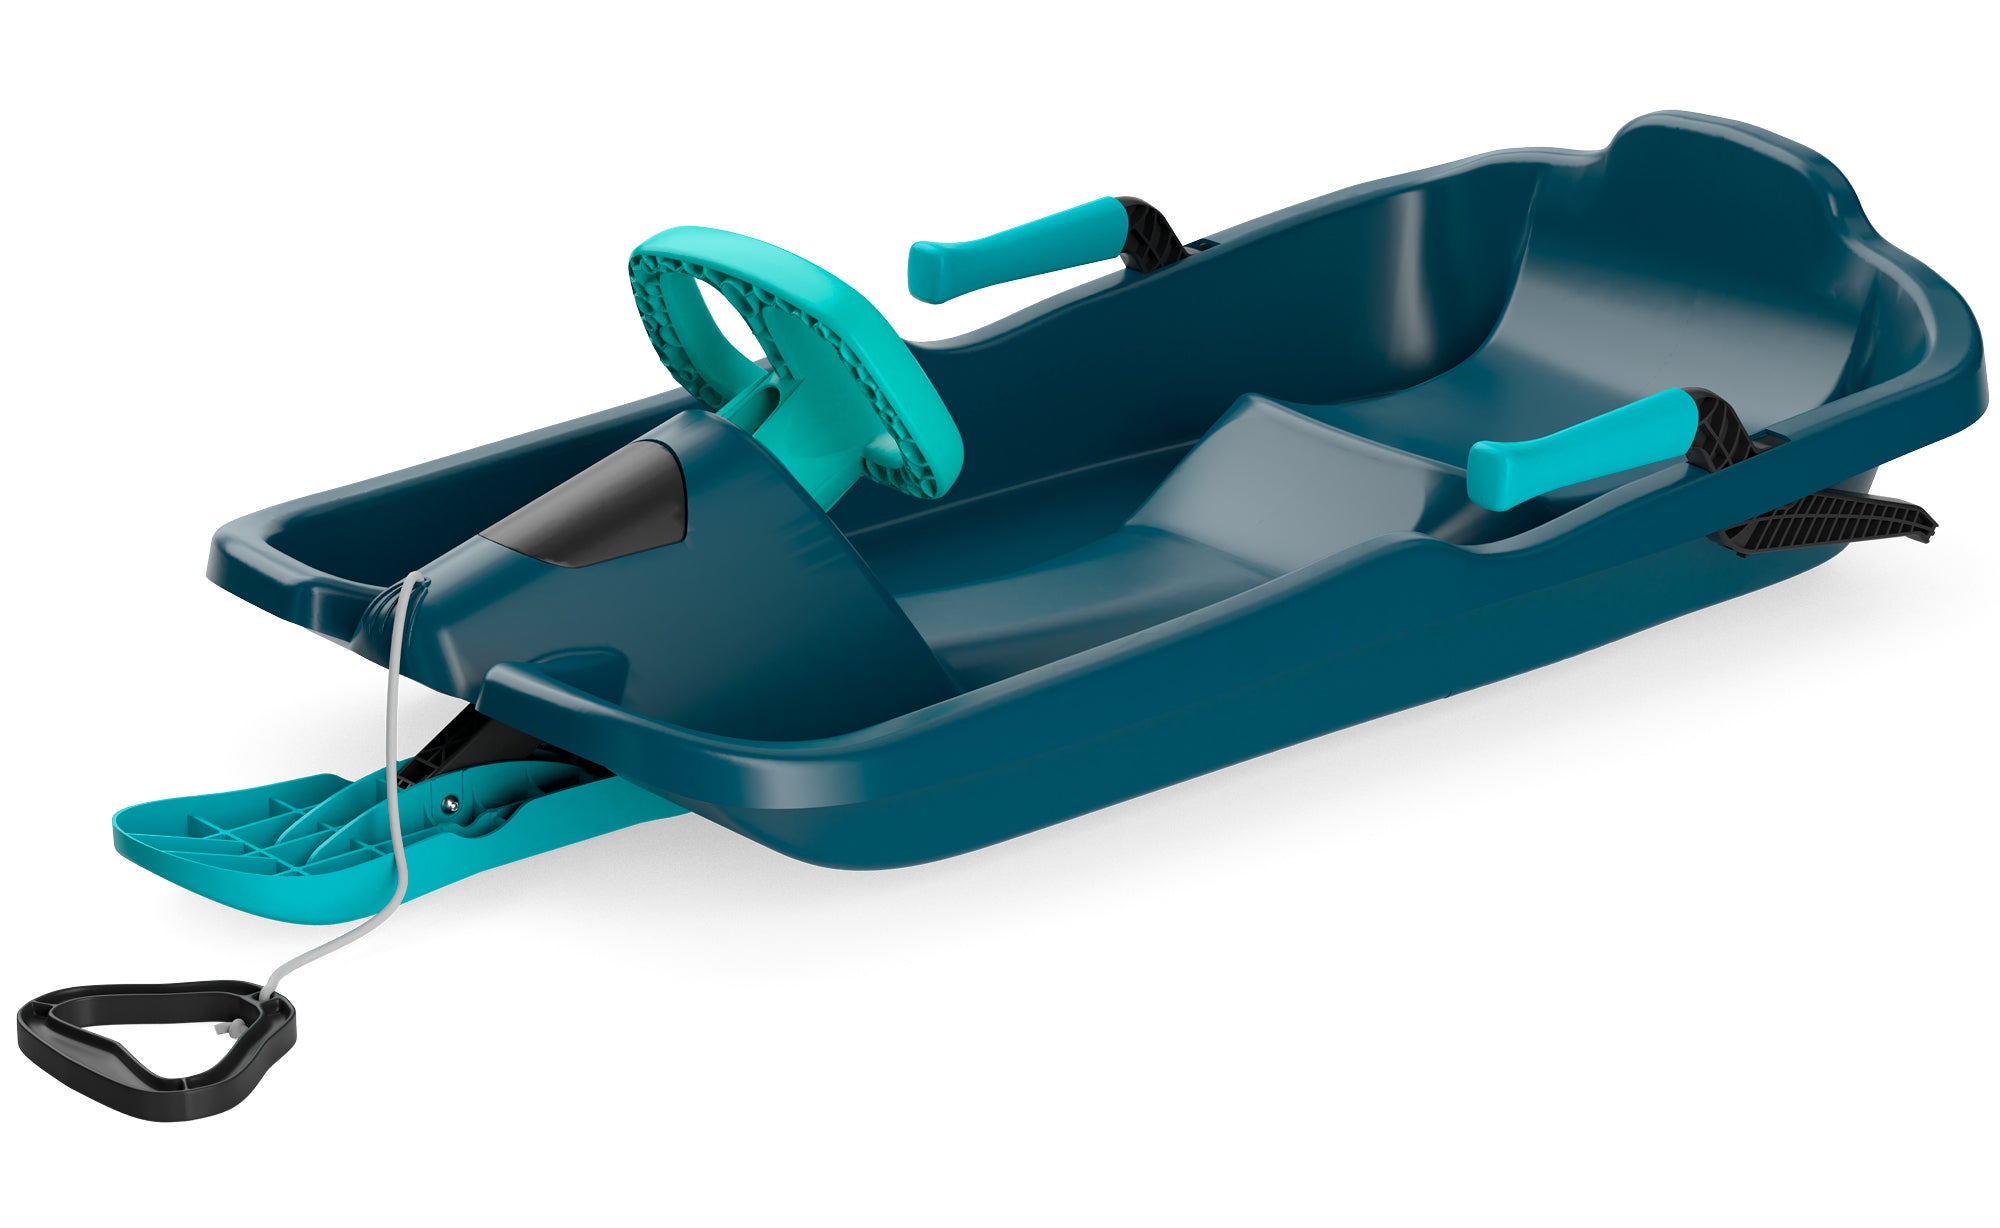 Gizmo Riders Nebula Snow Sled for Kids, Ages 3+